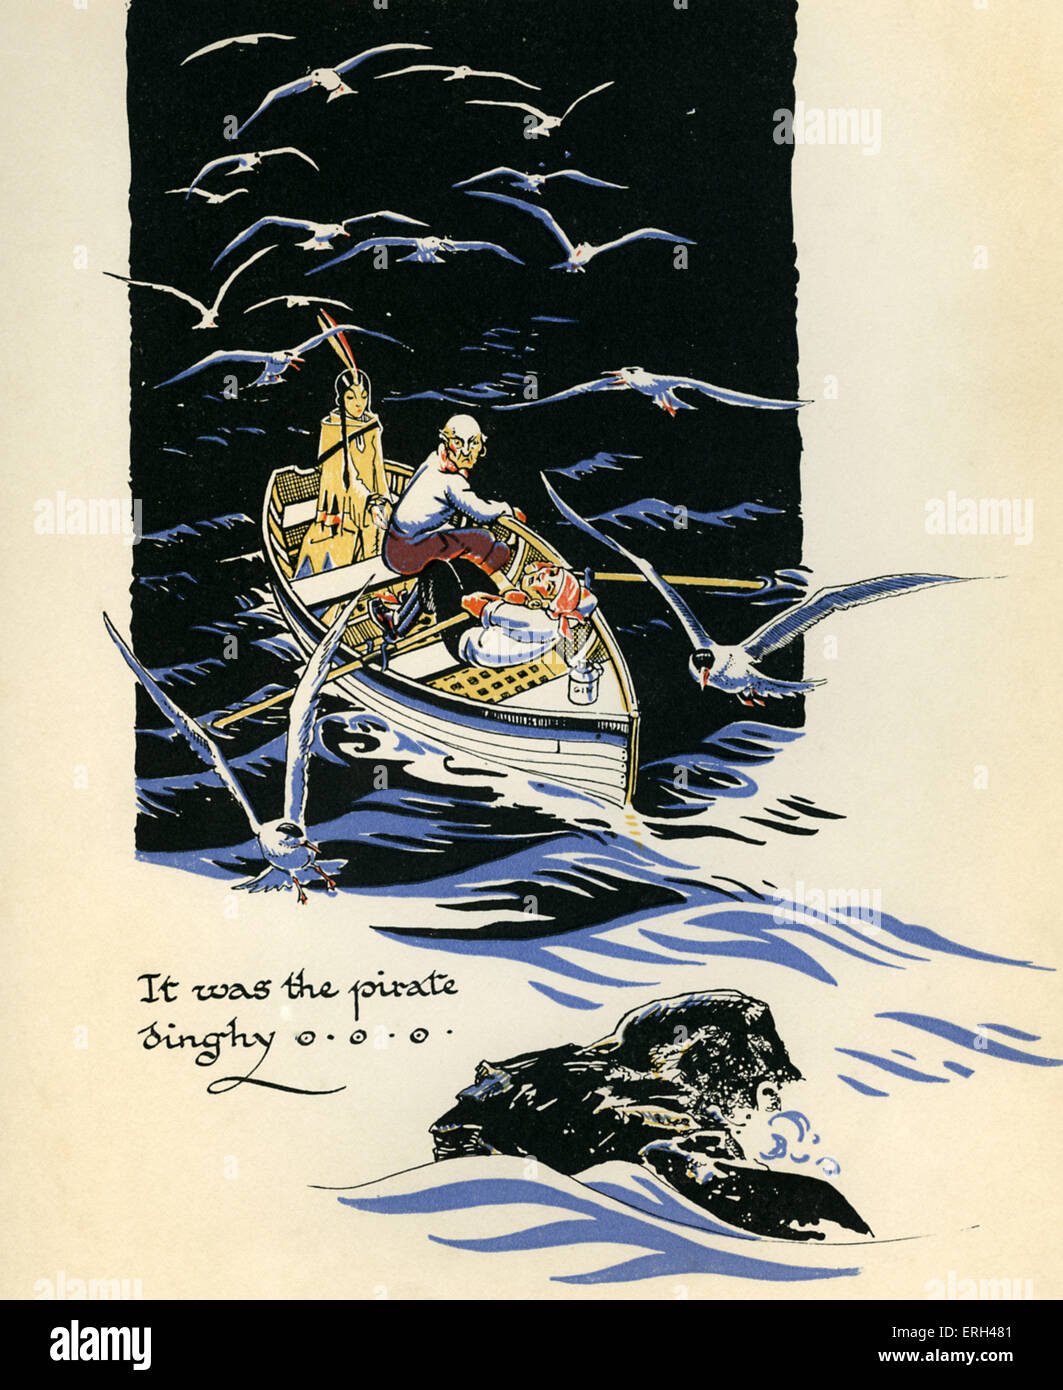 J. M. Barrie 's 'Peter Pan'. 'It was the pirate dinghy'. James Matthew Barrie, Scottish novelist and playwright, 9 May 1860 – 19 June 1937. Illustration by Gwynedd M. Hudson. Stock Photo